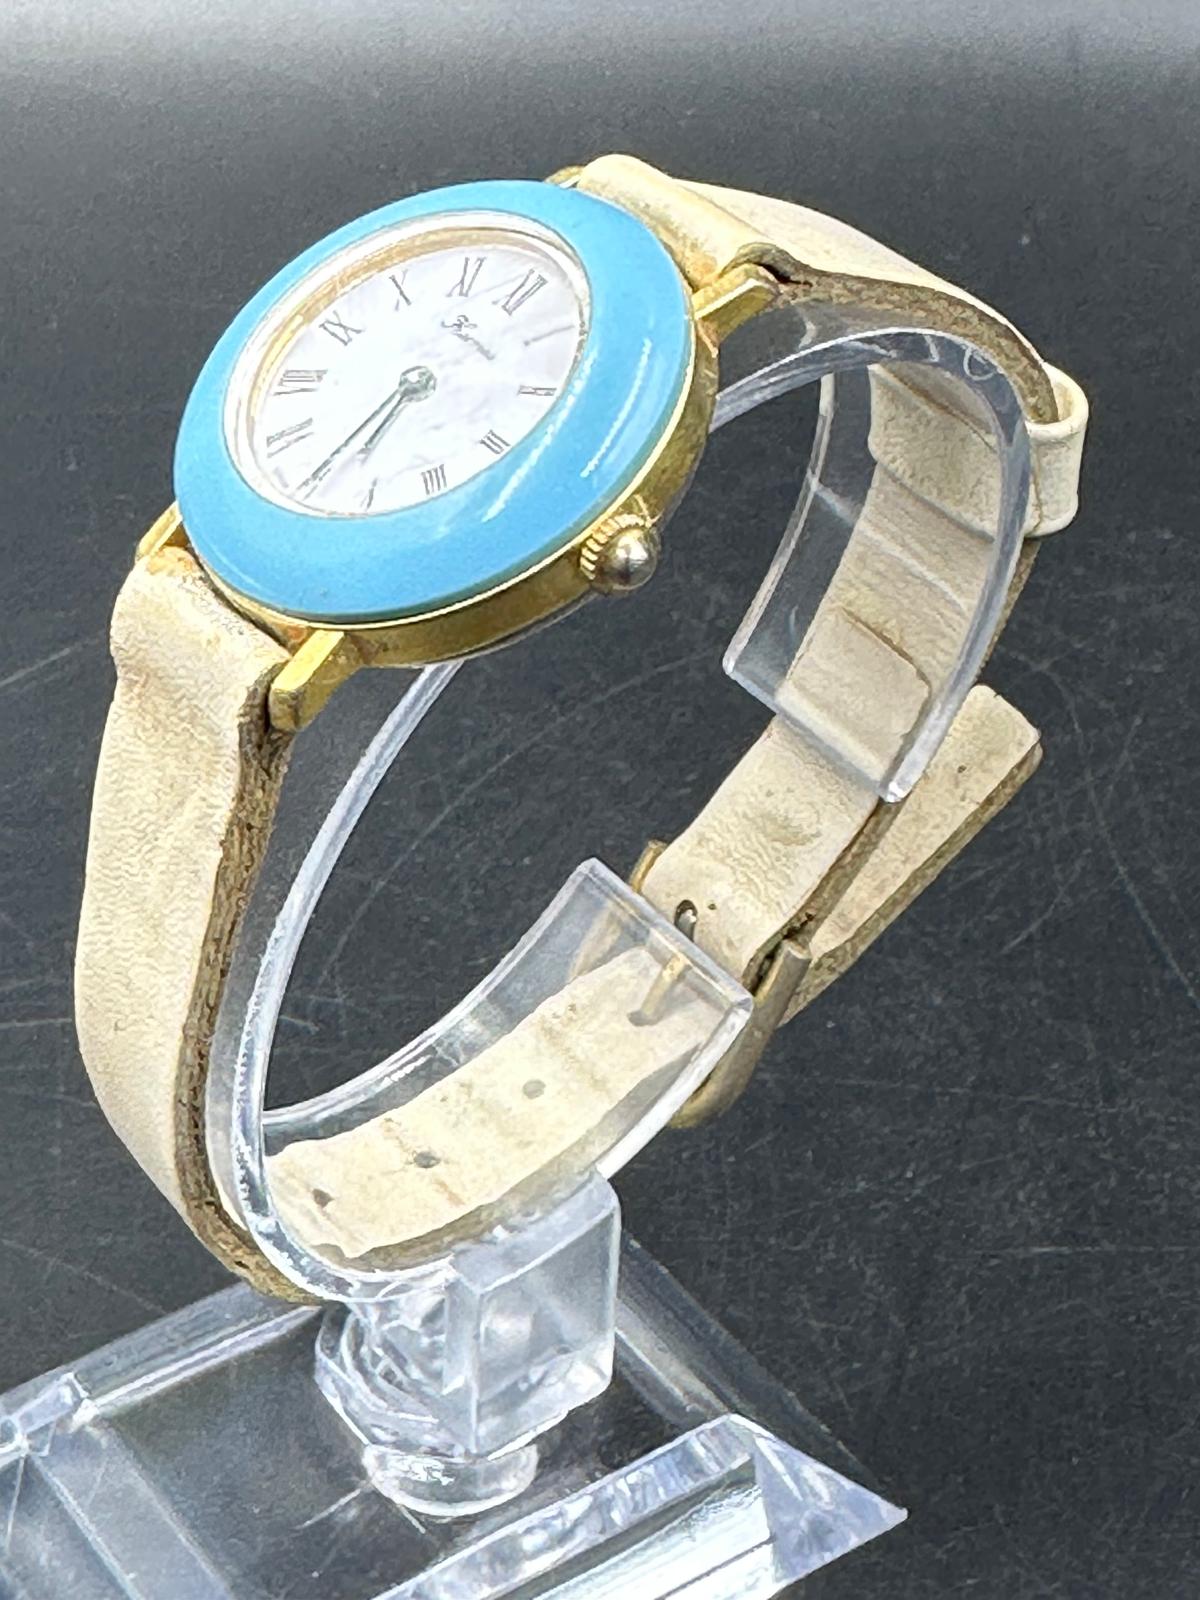 A vintage Hermes, blue bezel watch on stainless steel with white leather strap. - Image 2 of 4